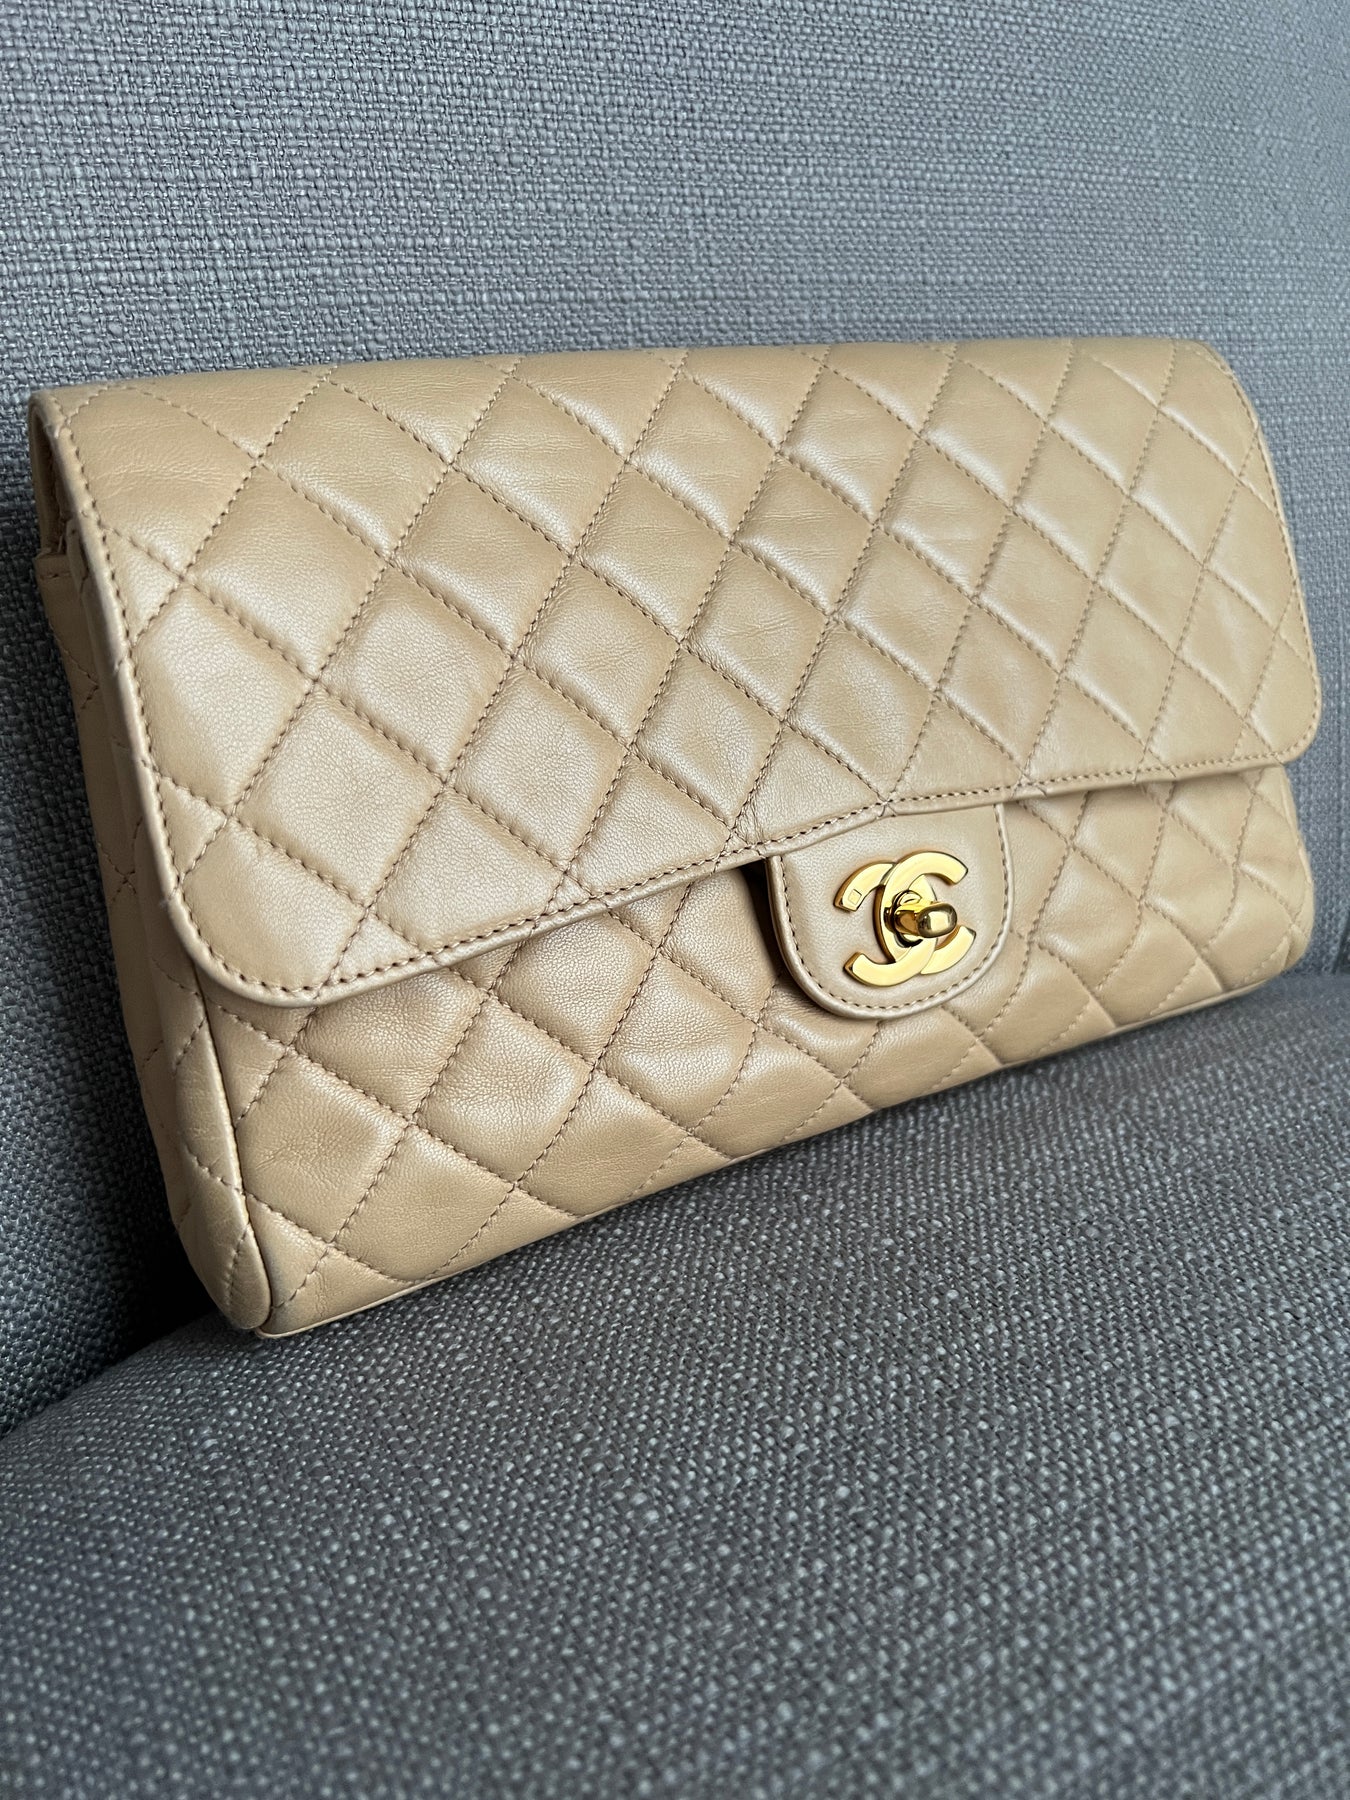 CHANEL Timeless Classic Vintage Clutch Bag – LUV Preloved